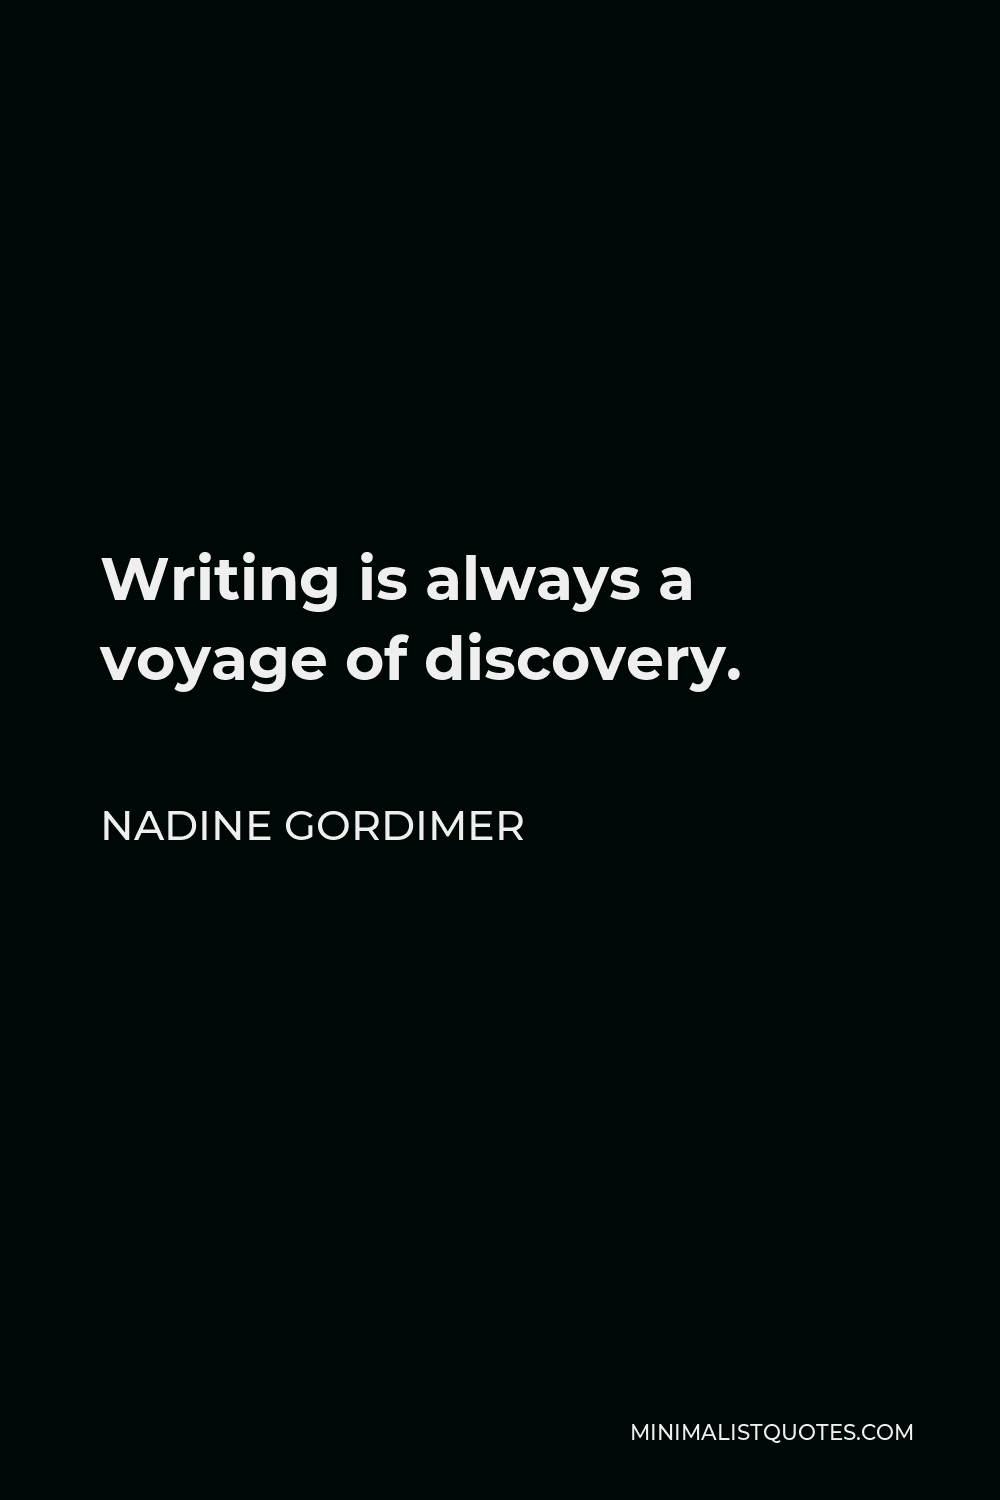 Nadine Gordimer Quote - Writing is always a voyage of discovery.